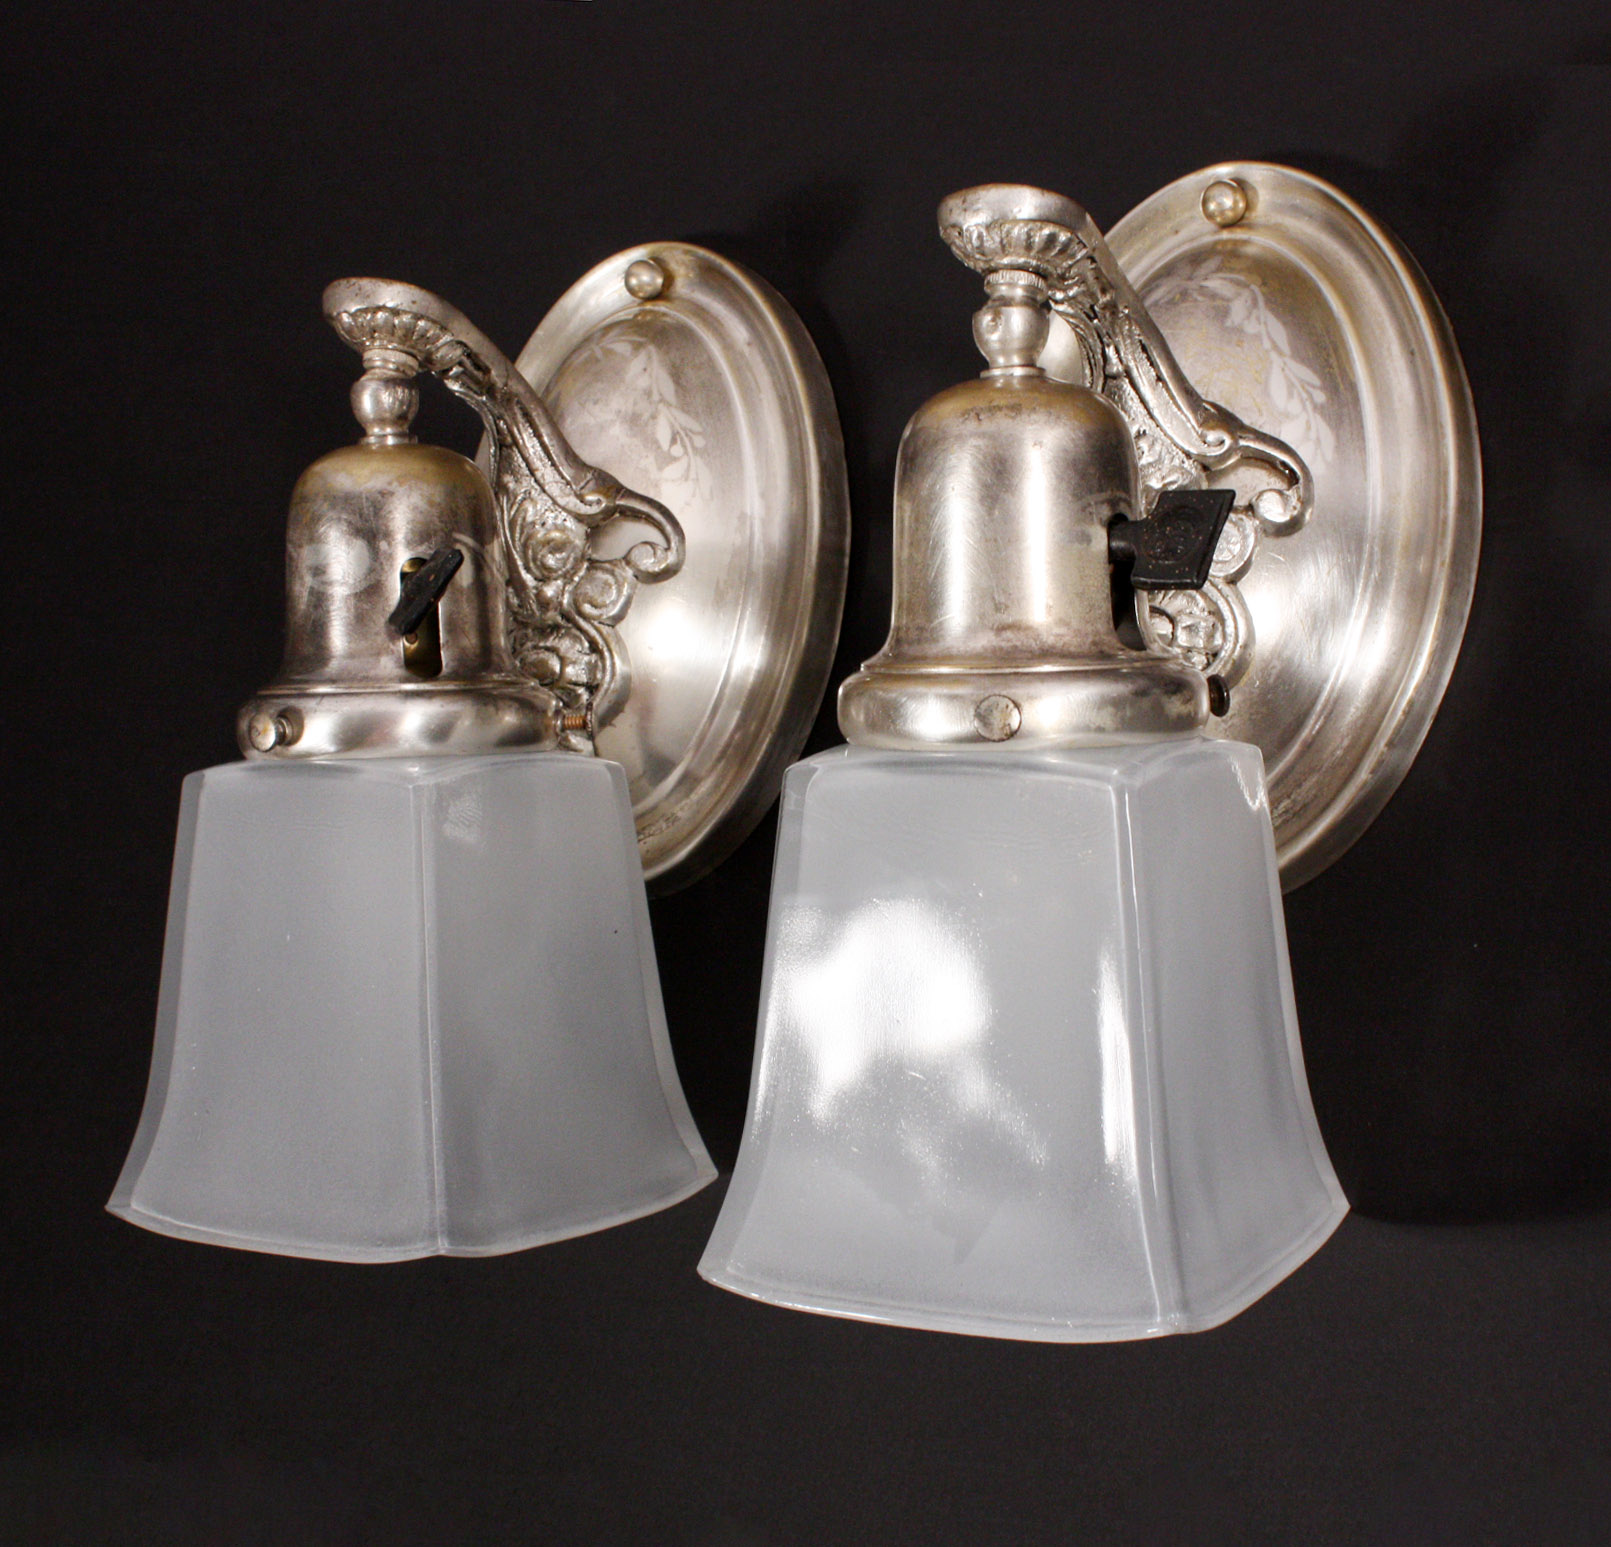 SOLD Beautiful Pair of Antique Single-Arm Sconces, Silver Plate, c. 1910-0